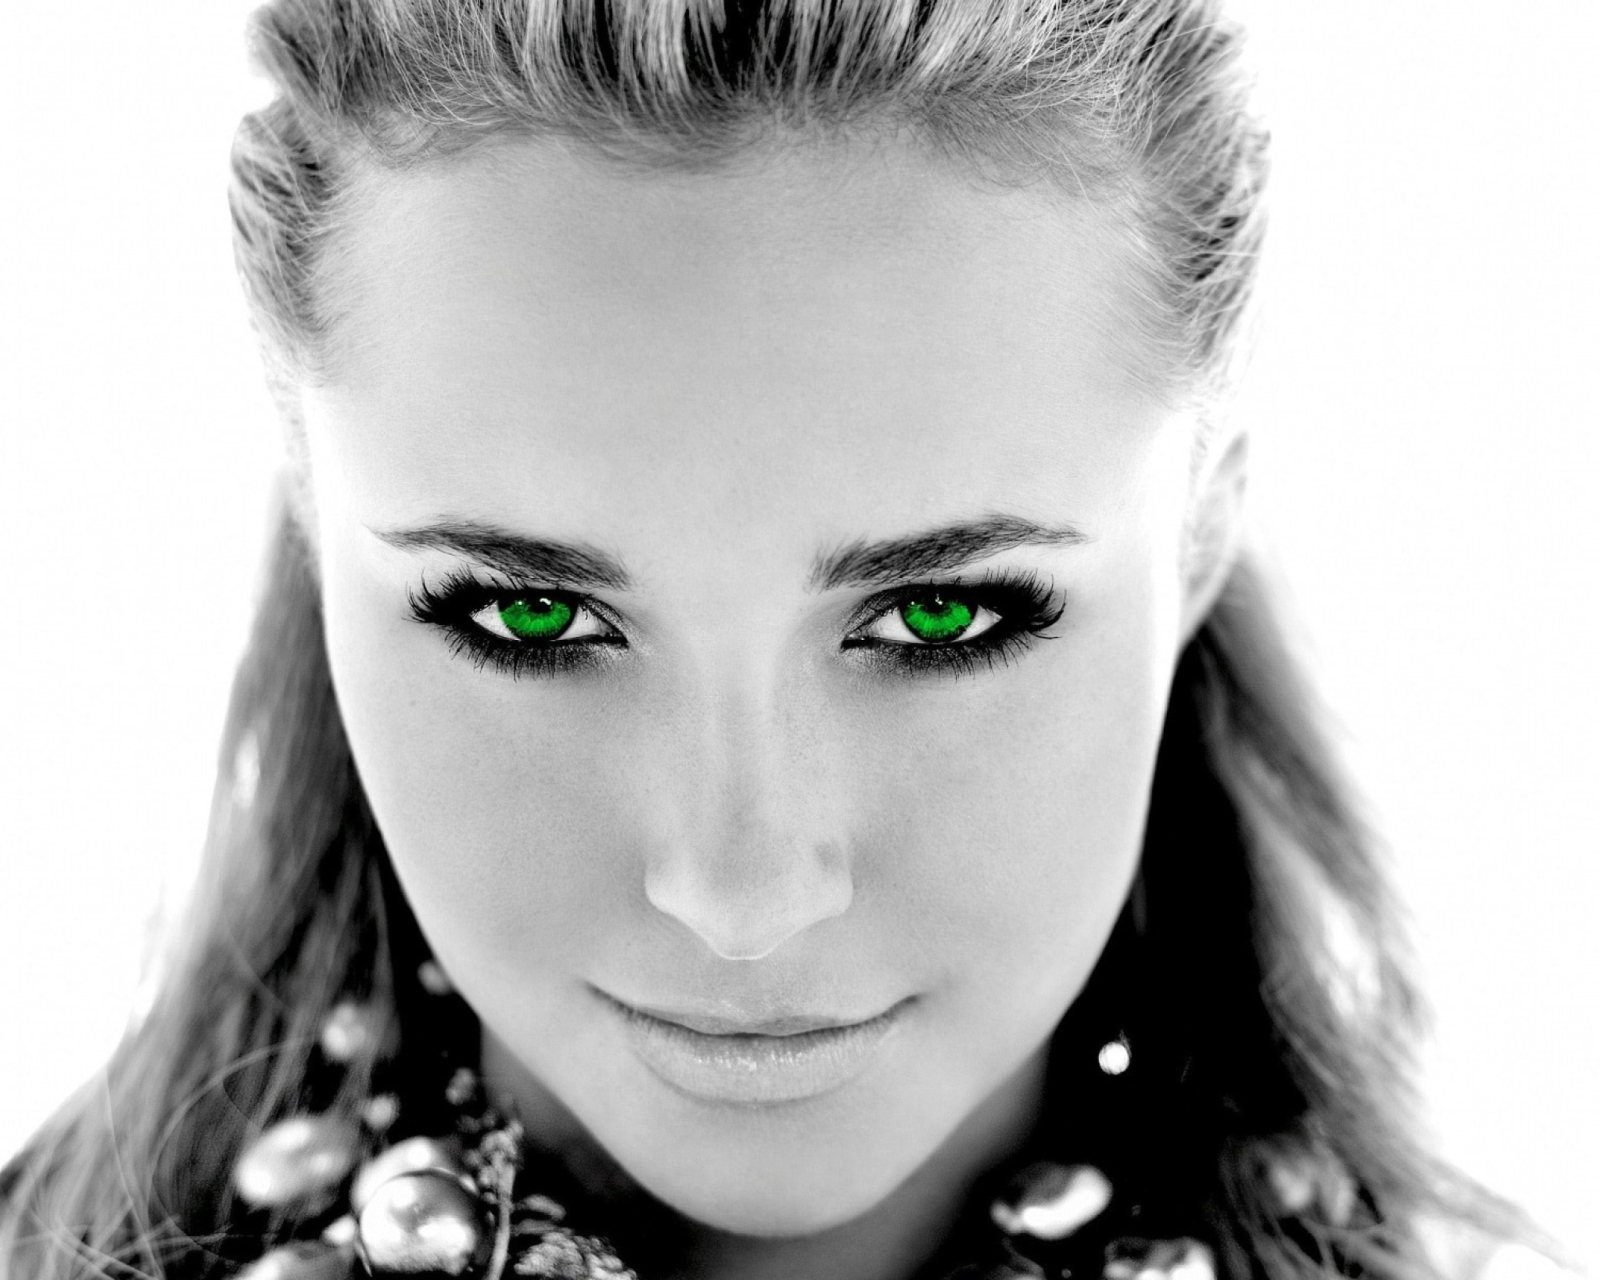 Girl With Green Eyes wallpaper 1600x1280